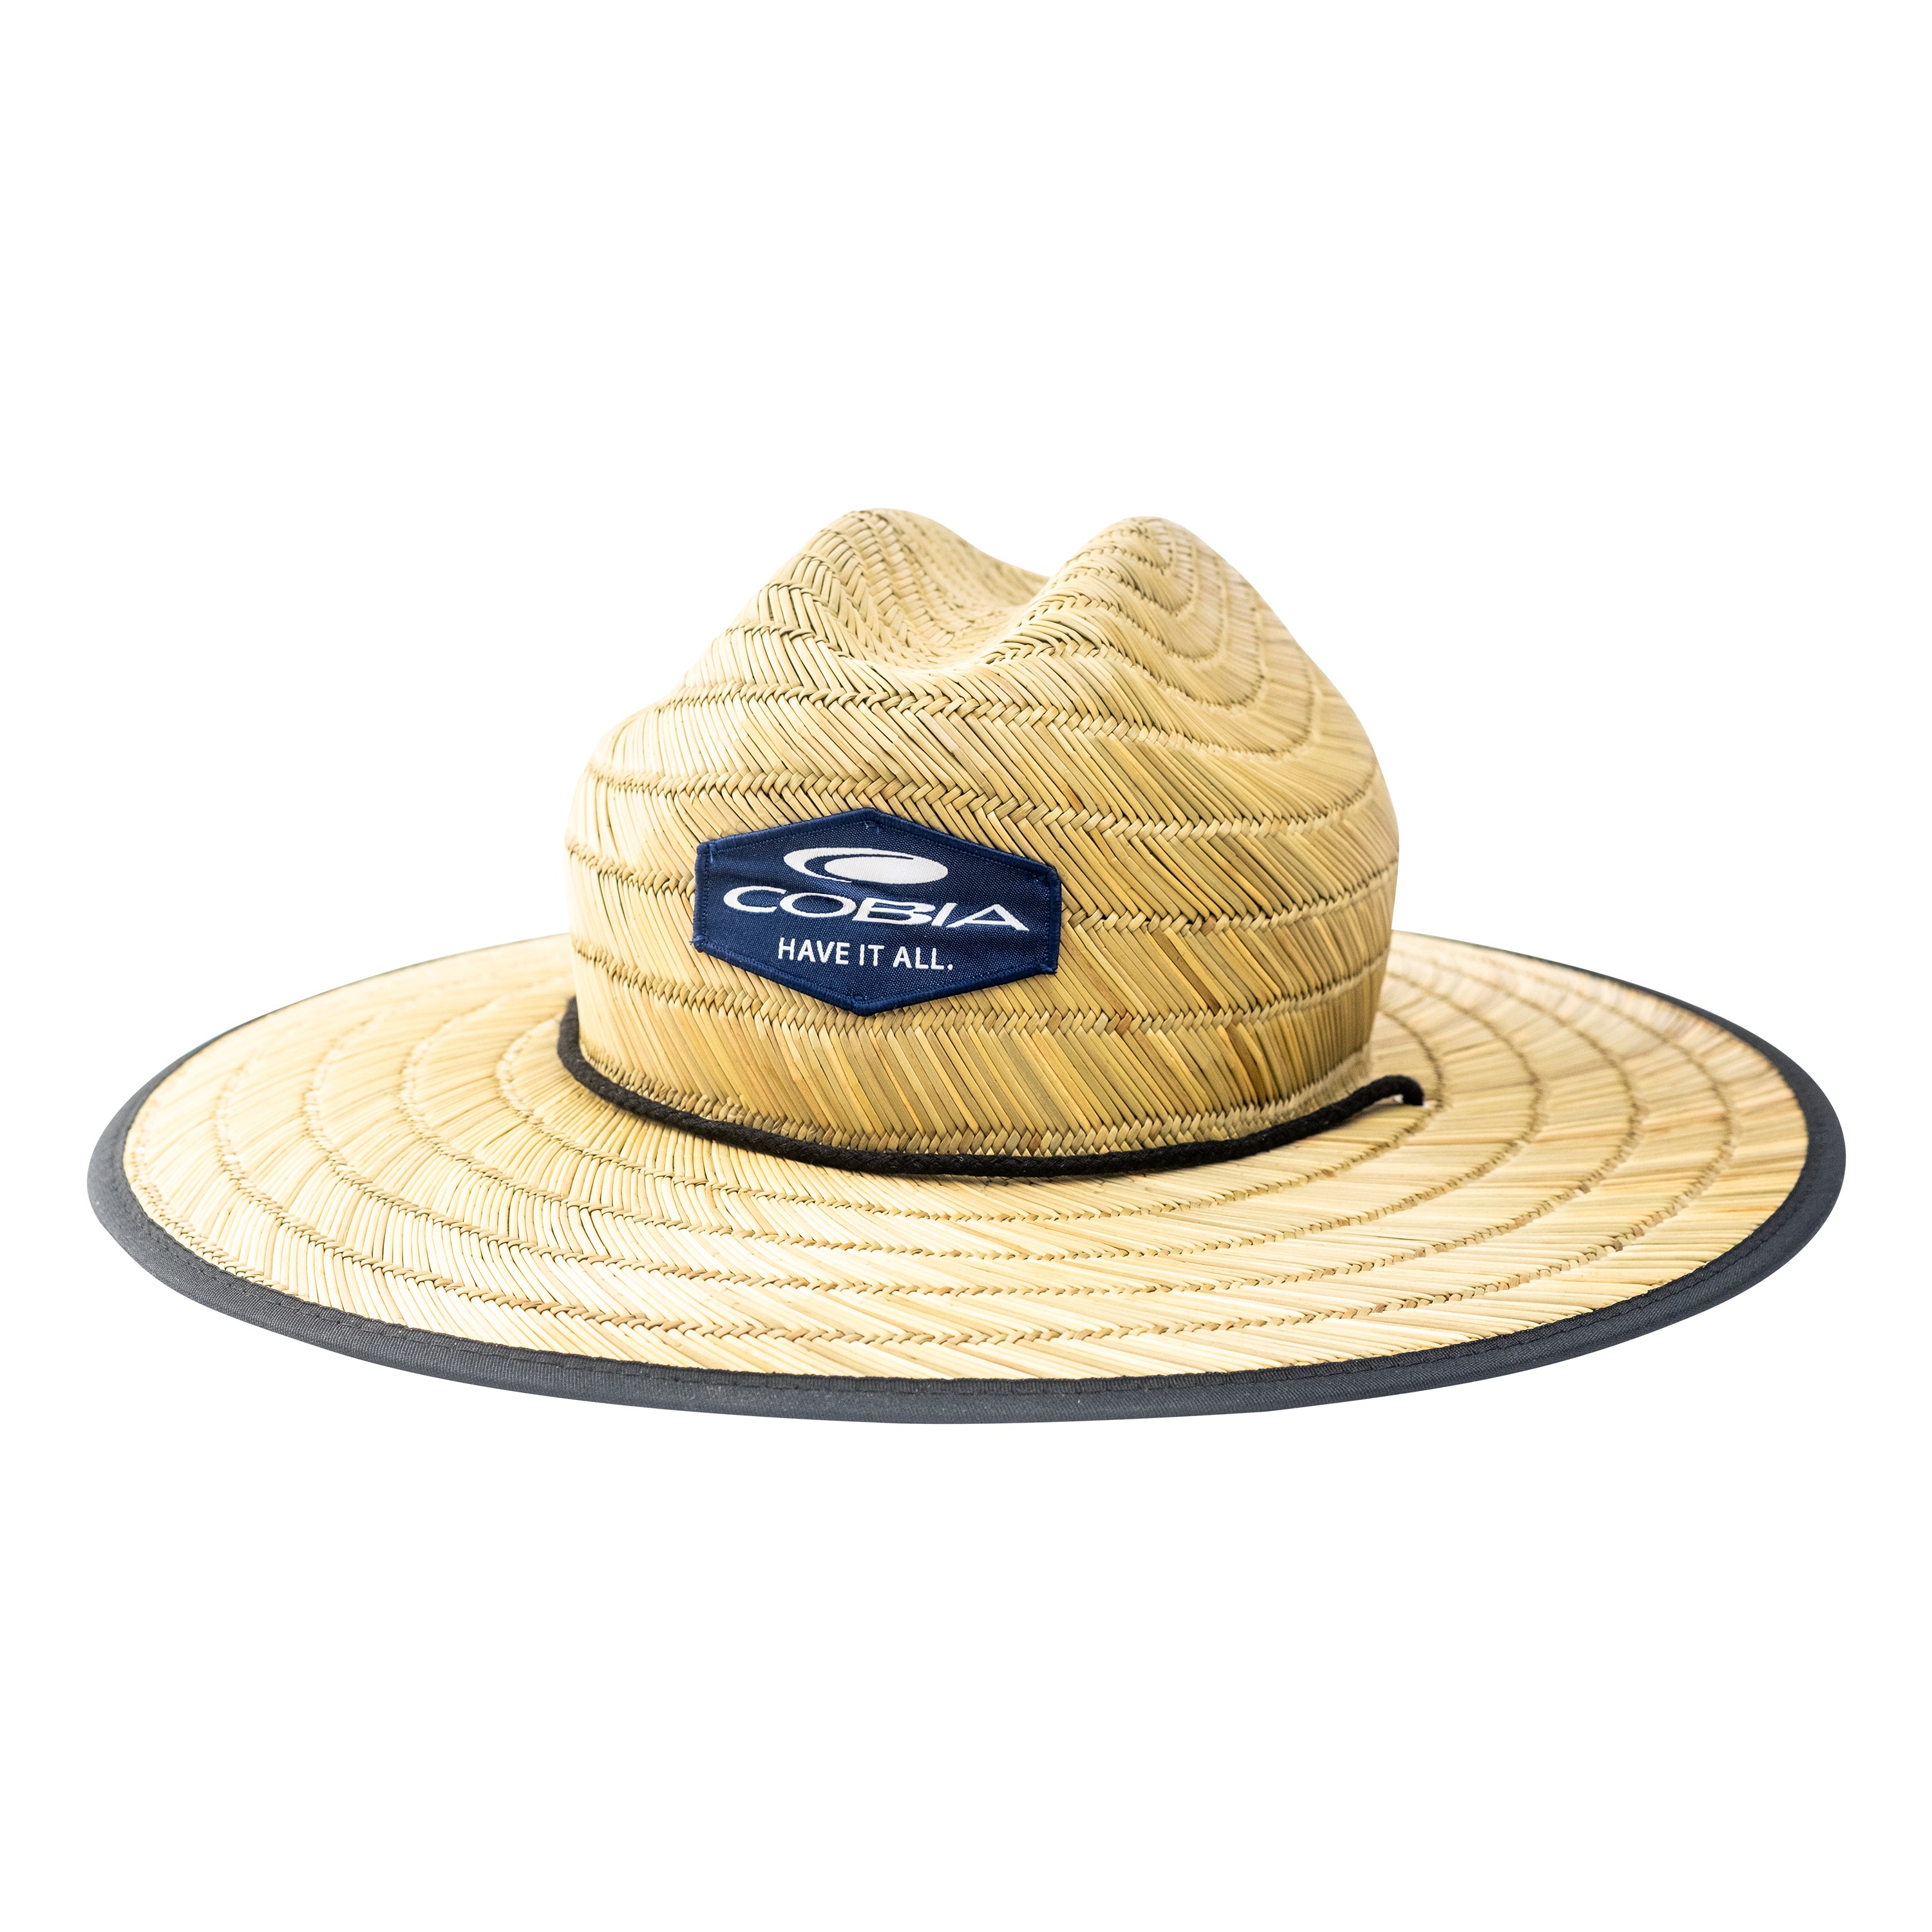 Cobia straw hat front